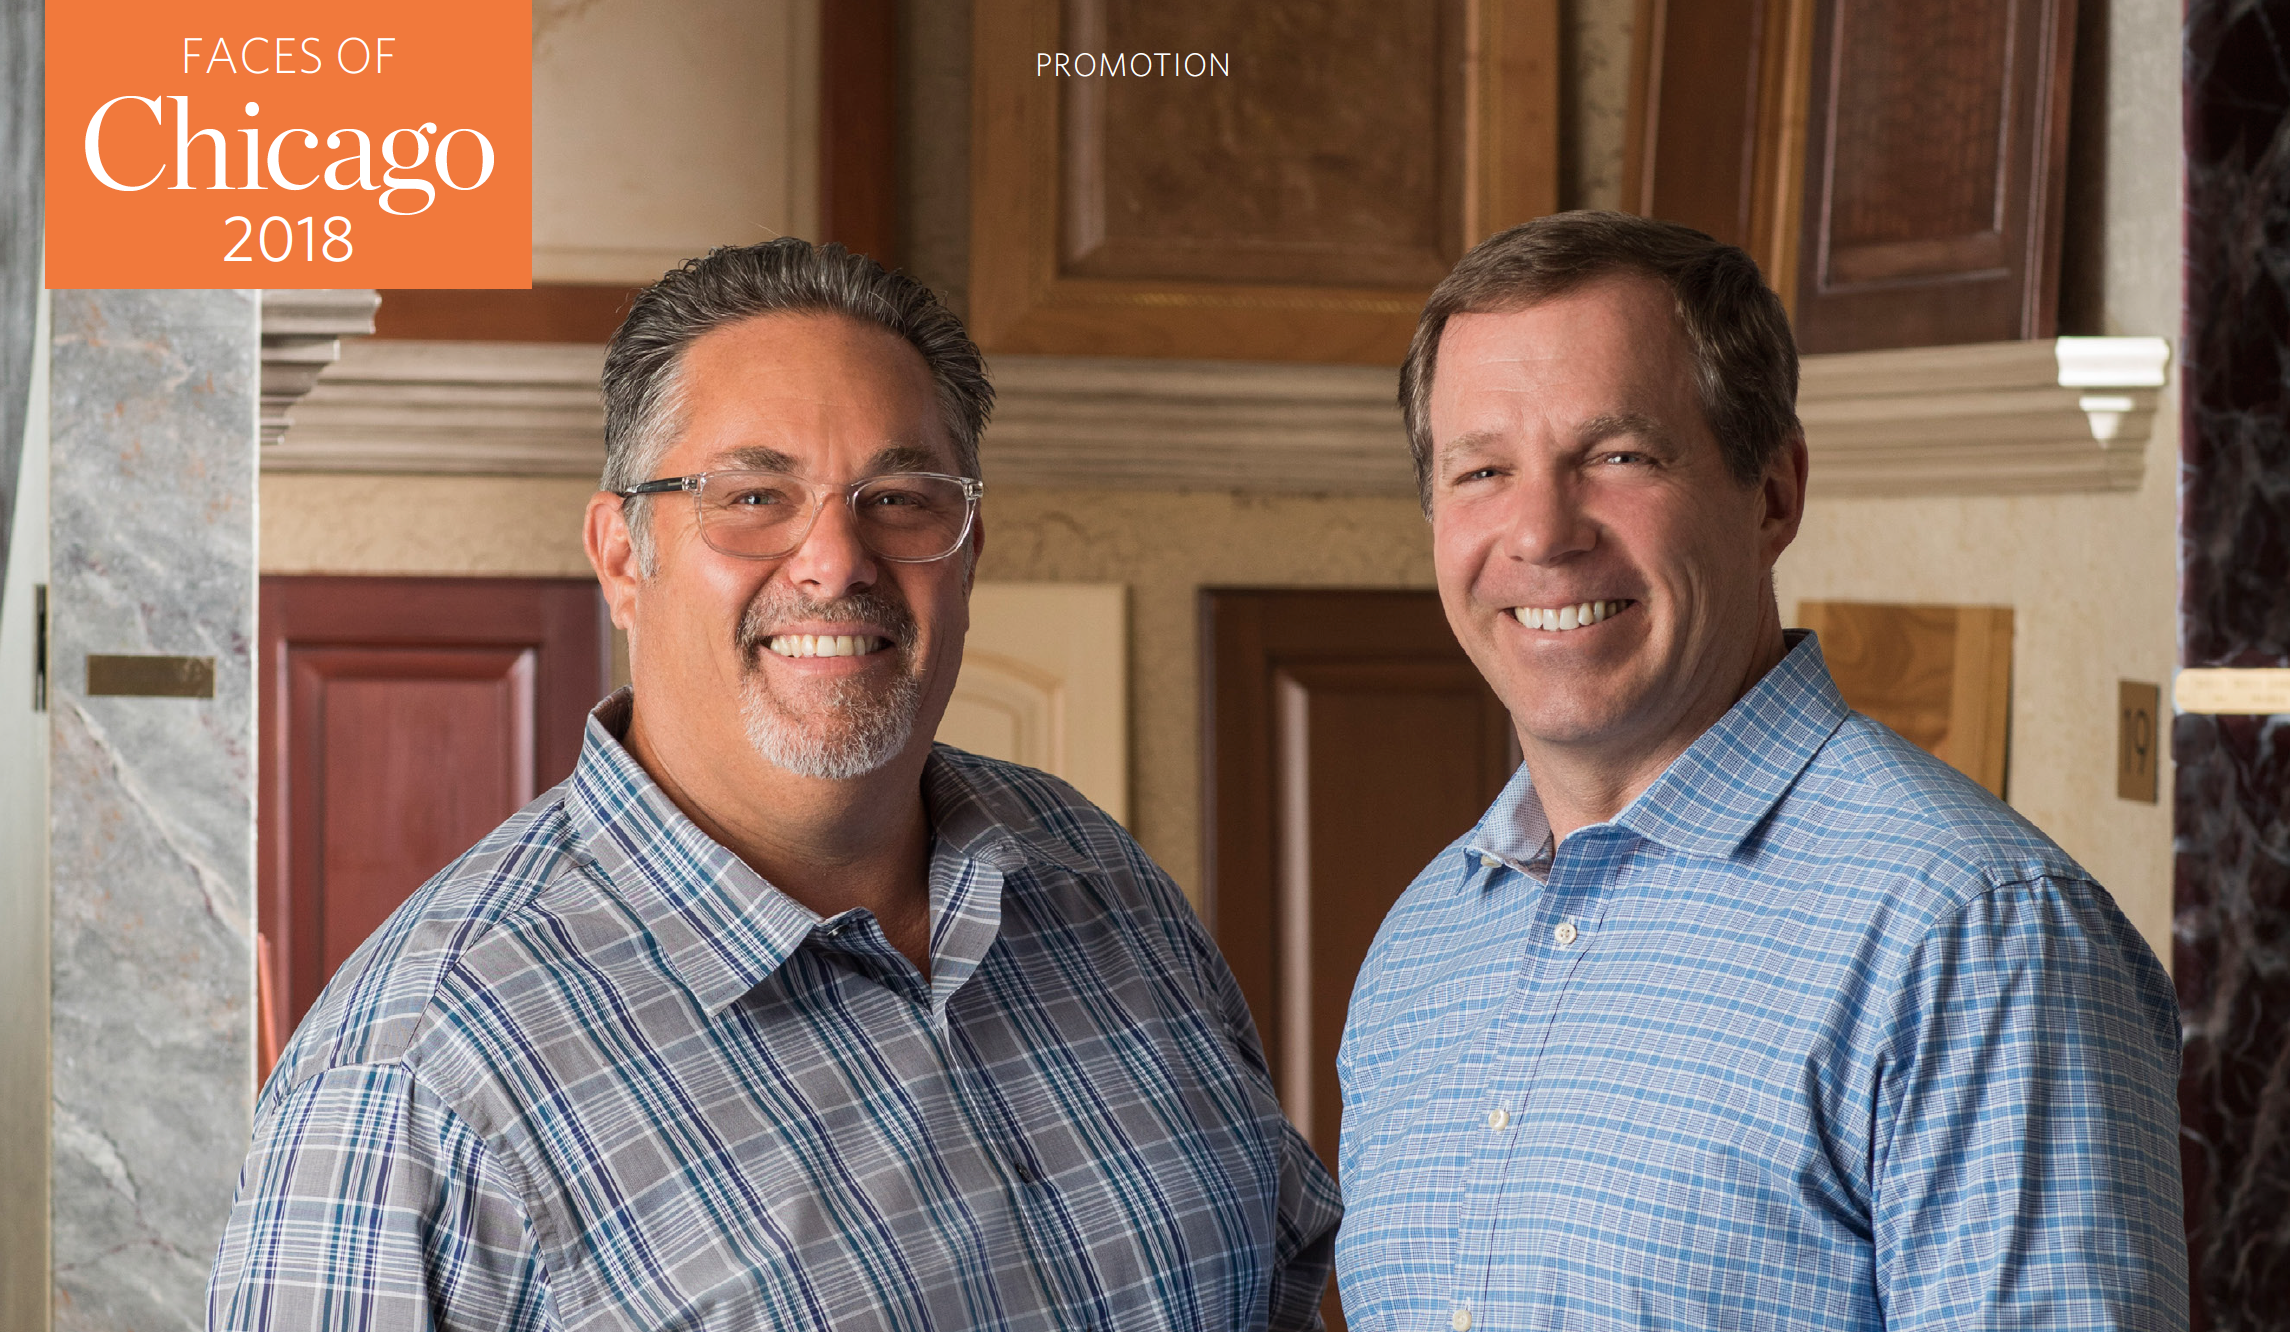 Jeff and Steve Hester Featured in Make It Better’s Faces of Chicago